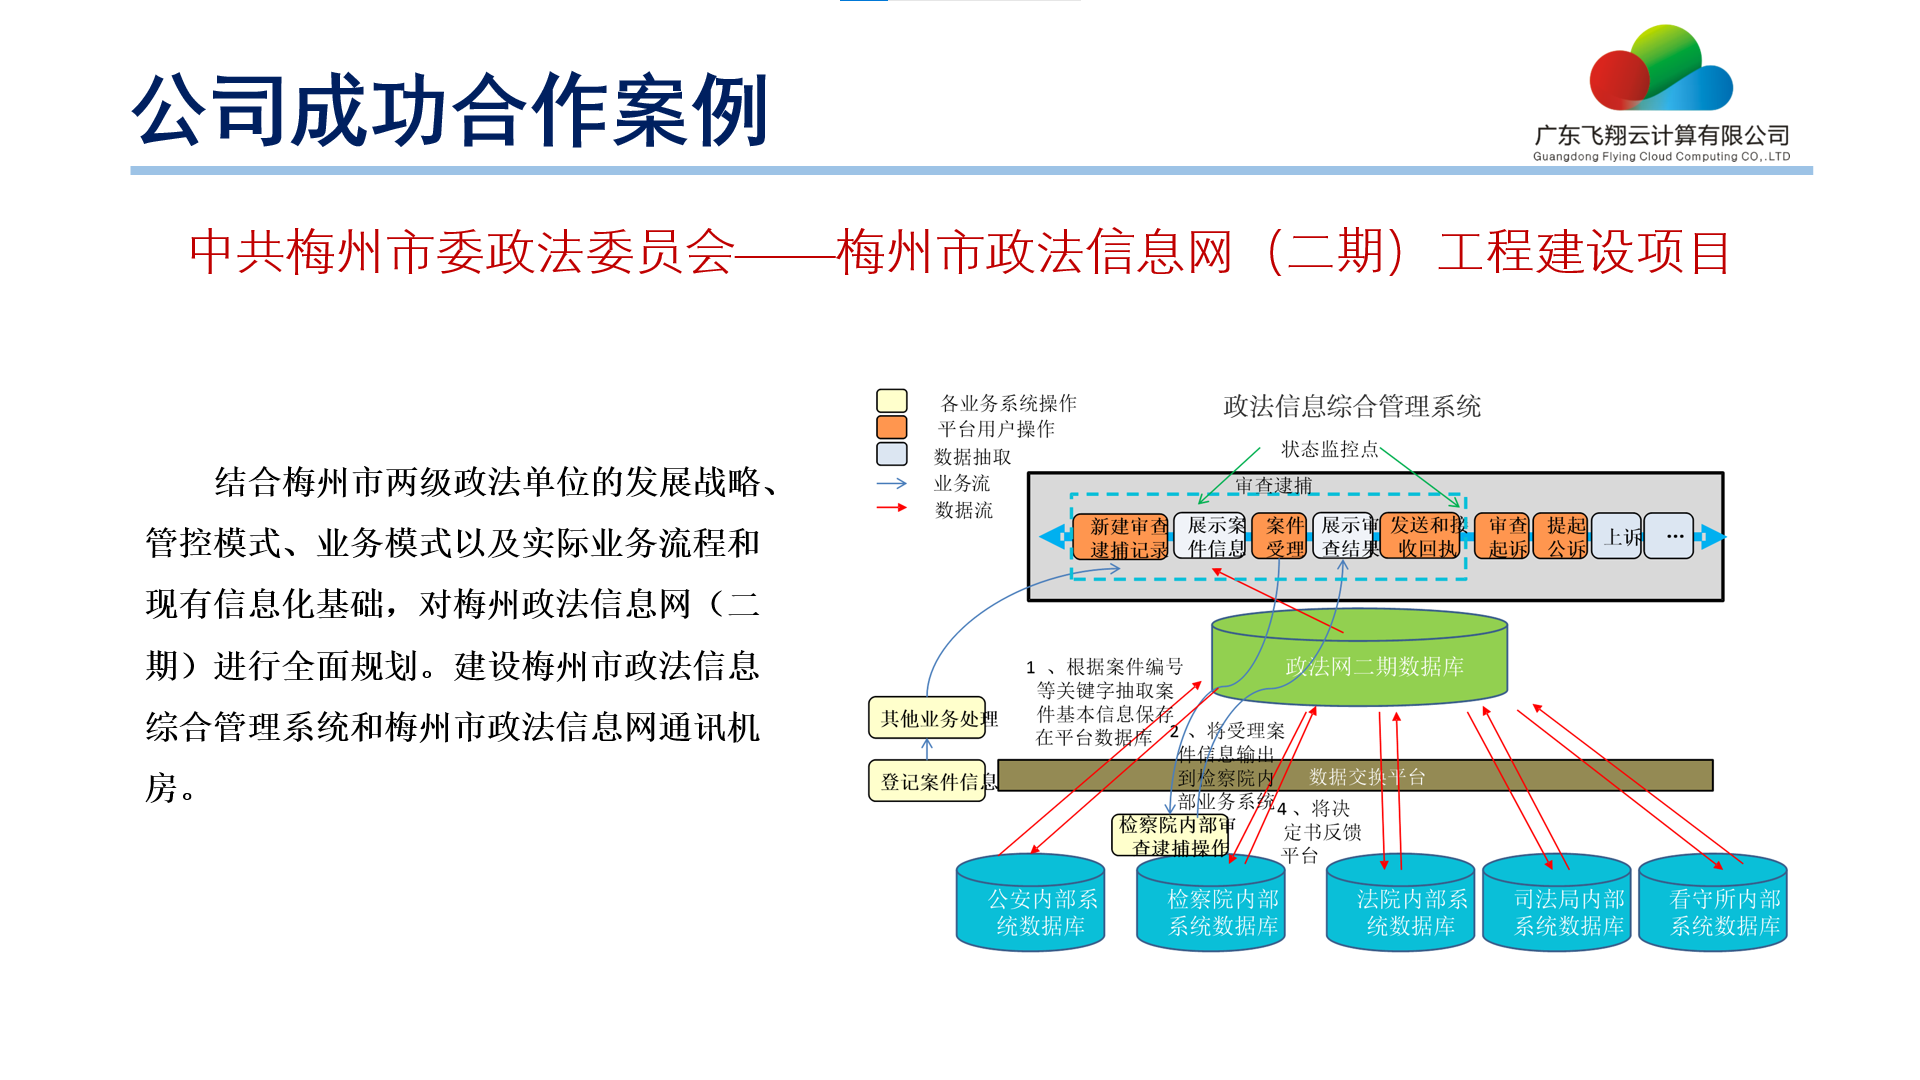 Meizhou Municipal Law Information Network (Phase II) engineering construction project